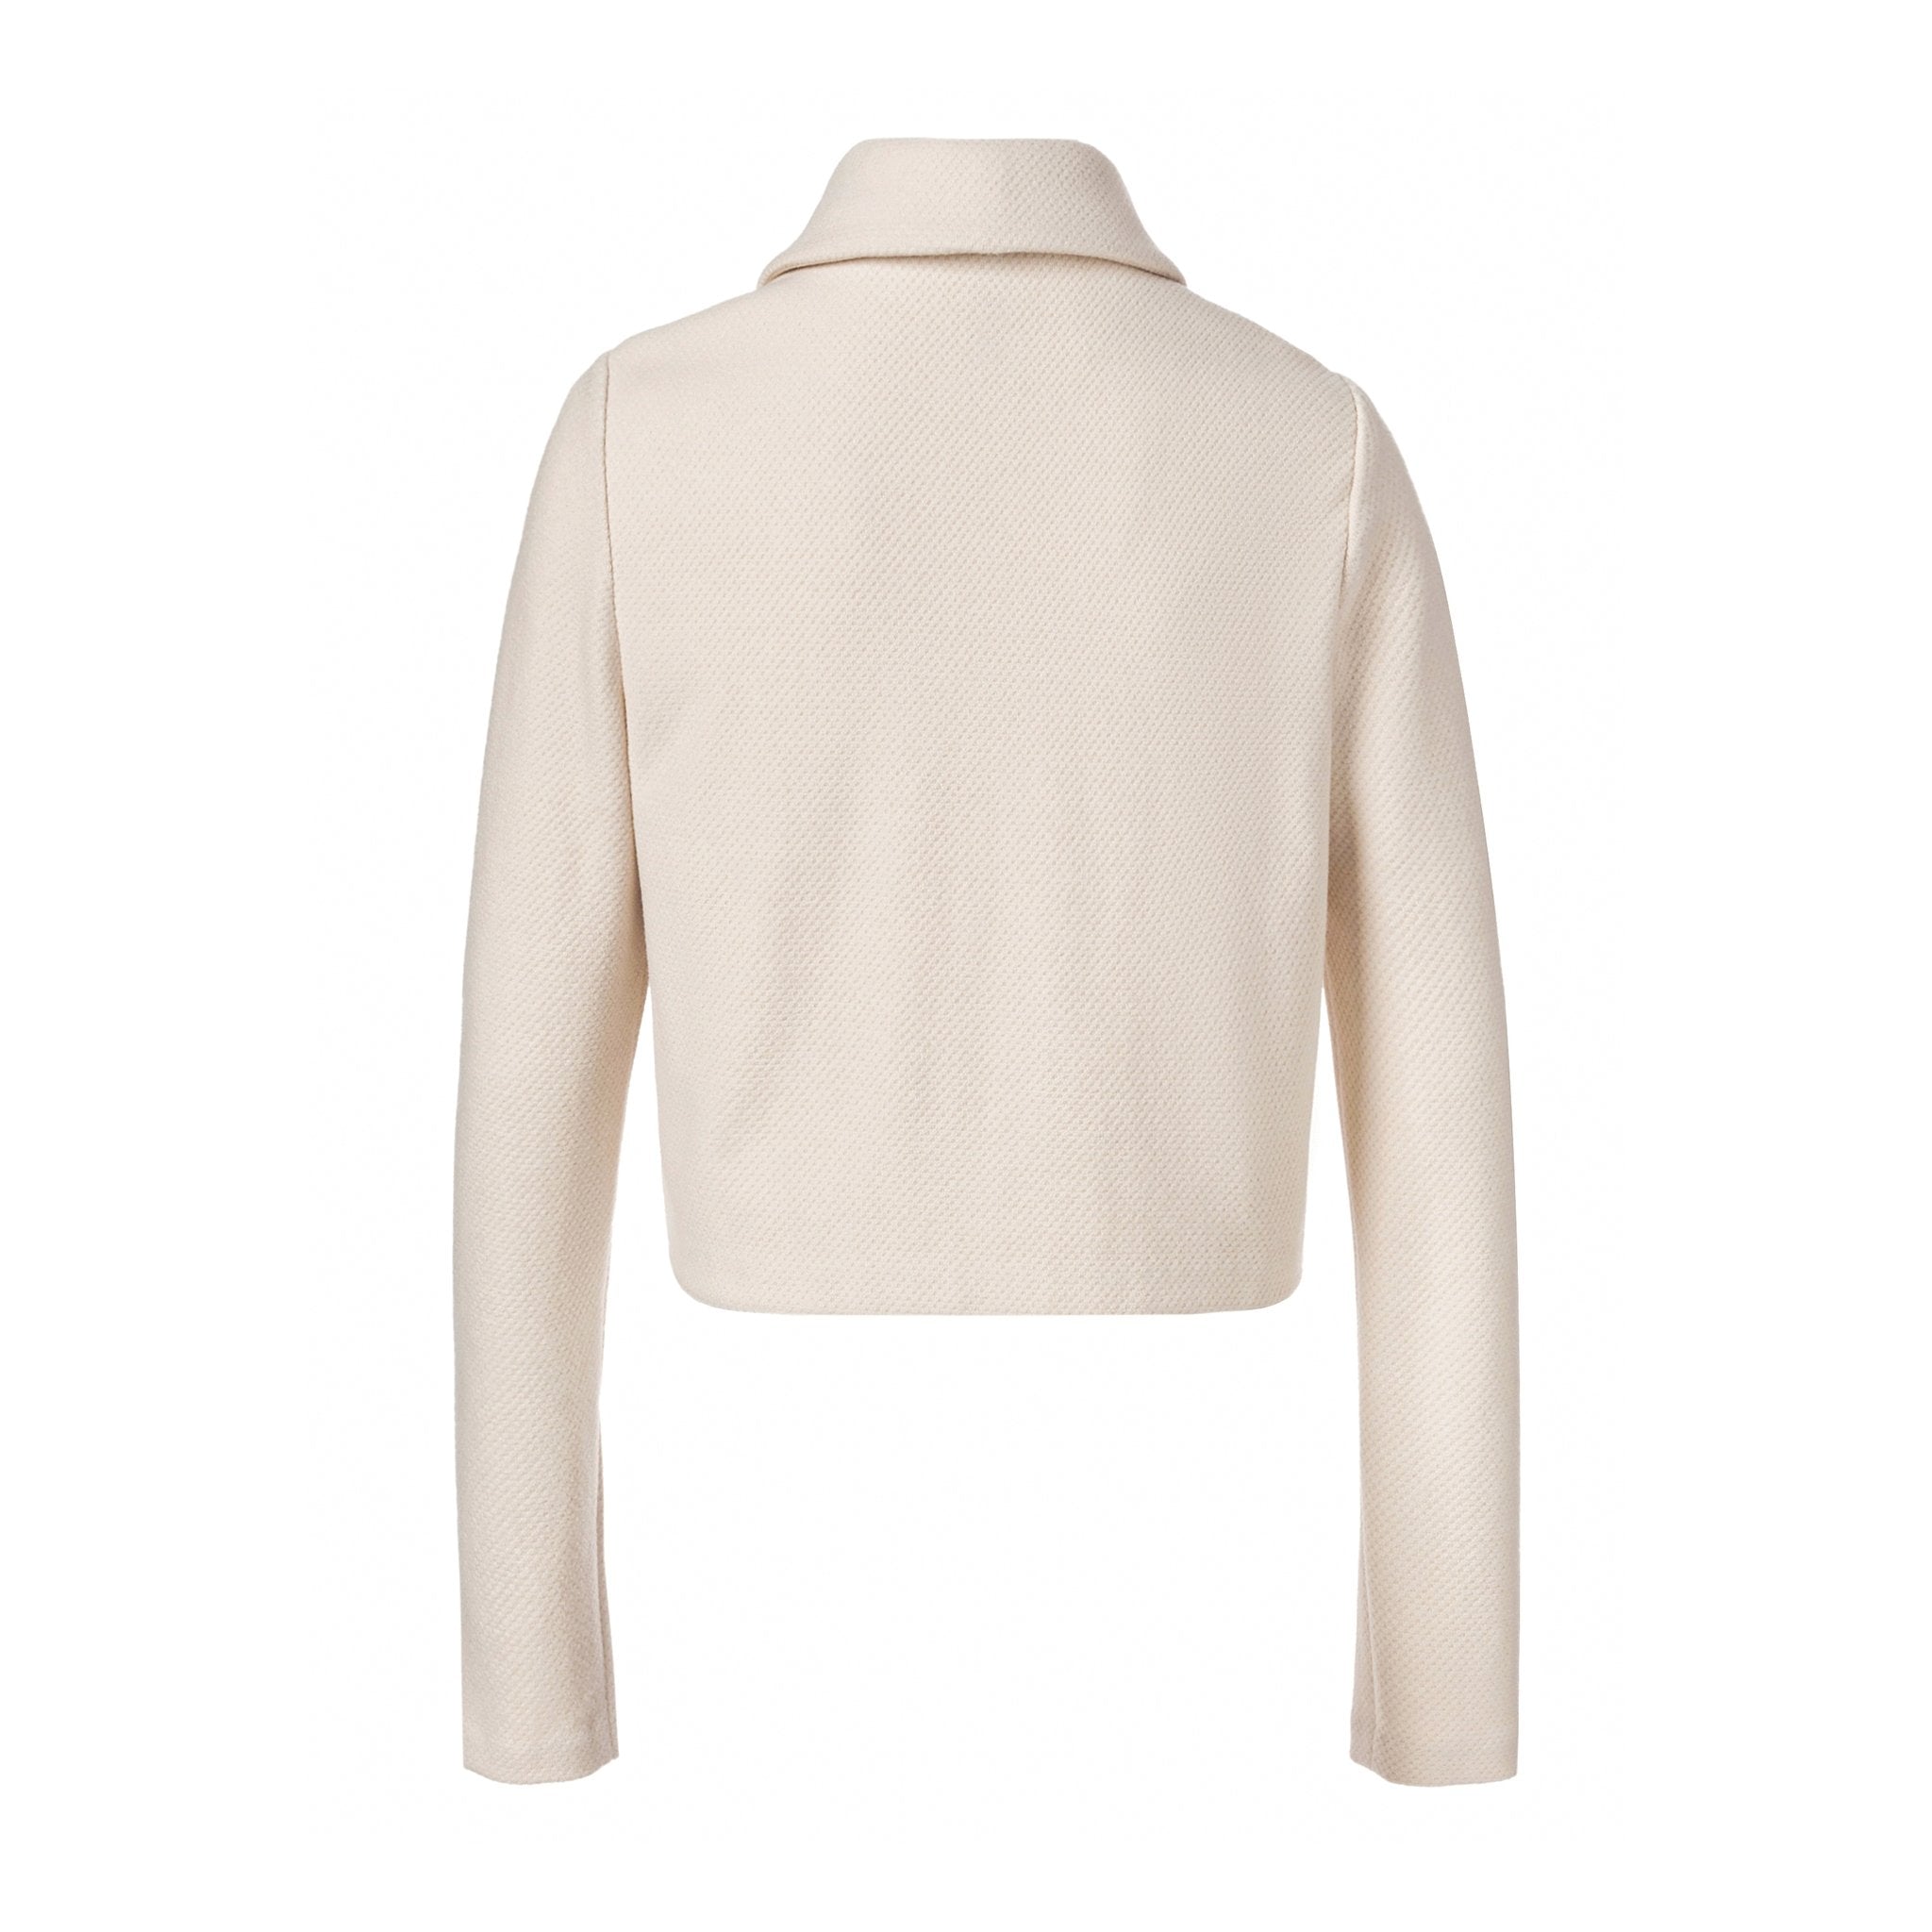 Ther. Jacquar Knitted Slim-Fit Jacket | MADA IN CHINA